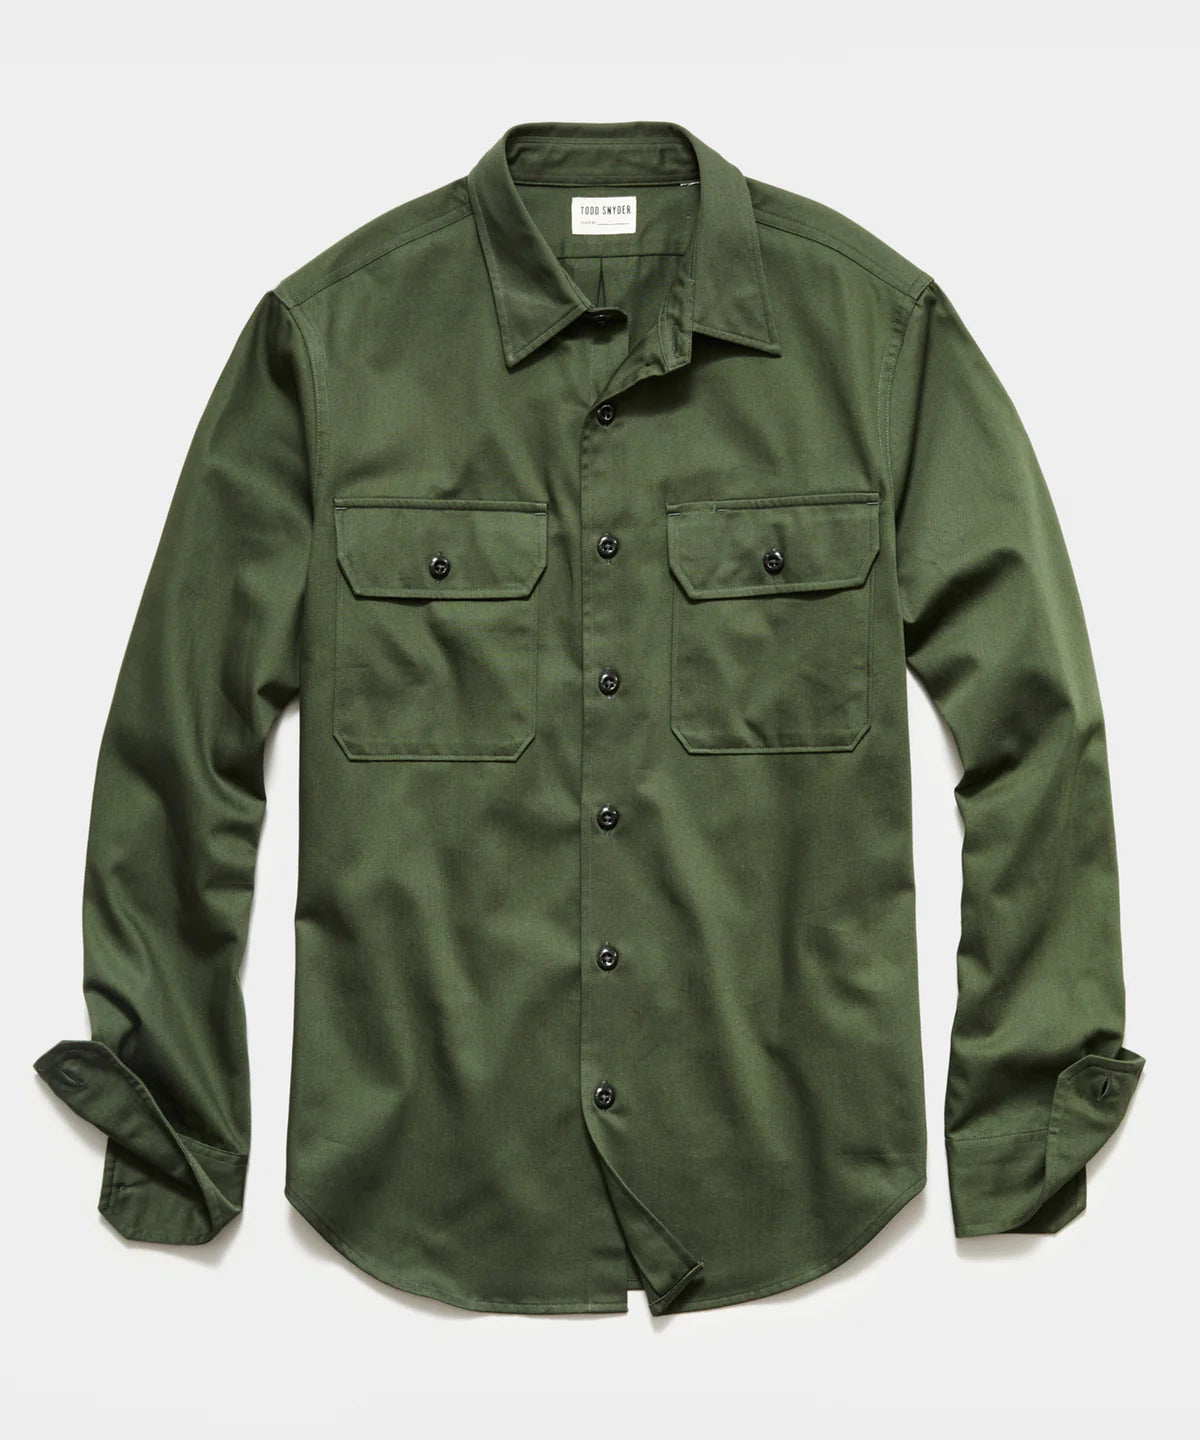 TODD SNYDER TWO POCKET UTILITY LONG SLEEVE SHIRT IN OAK MOSS